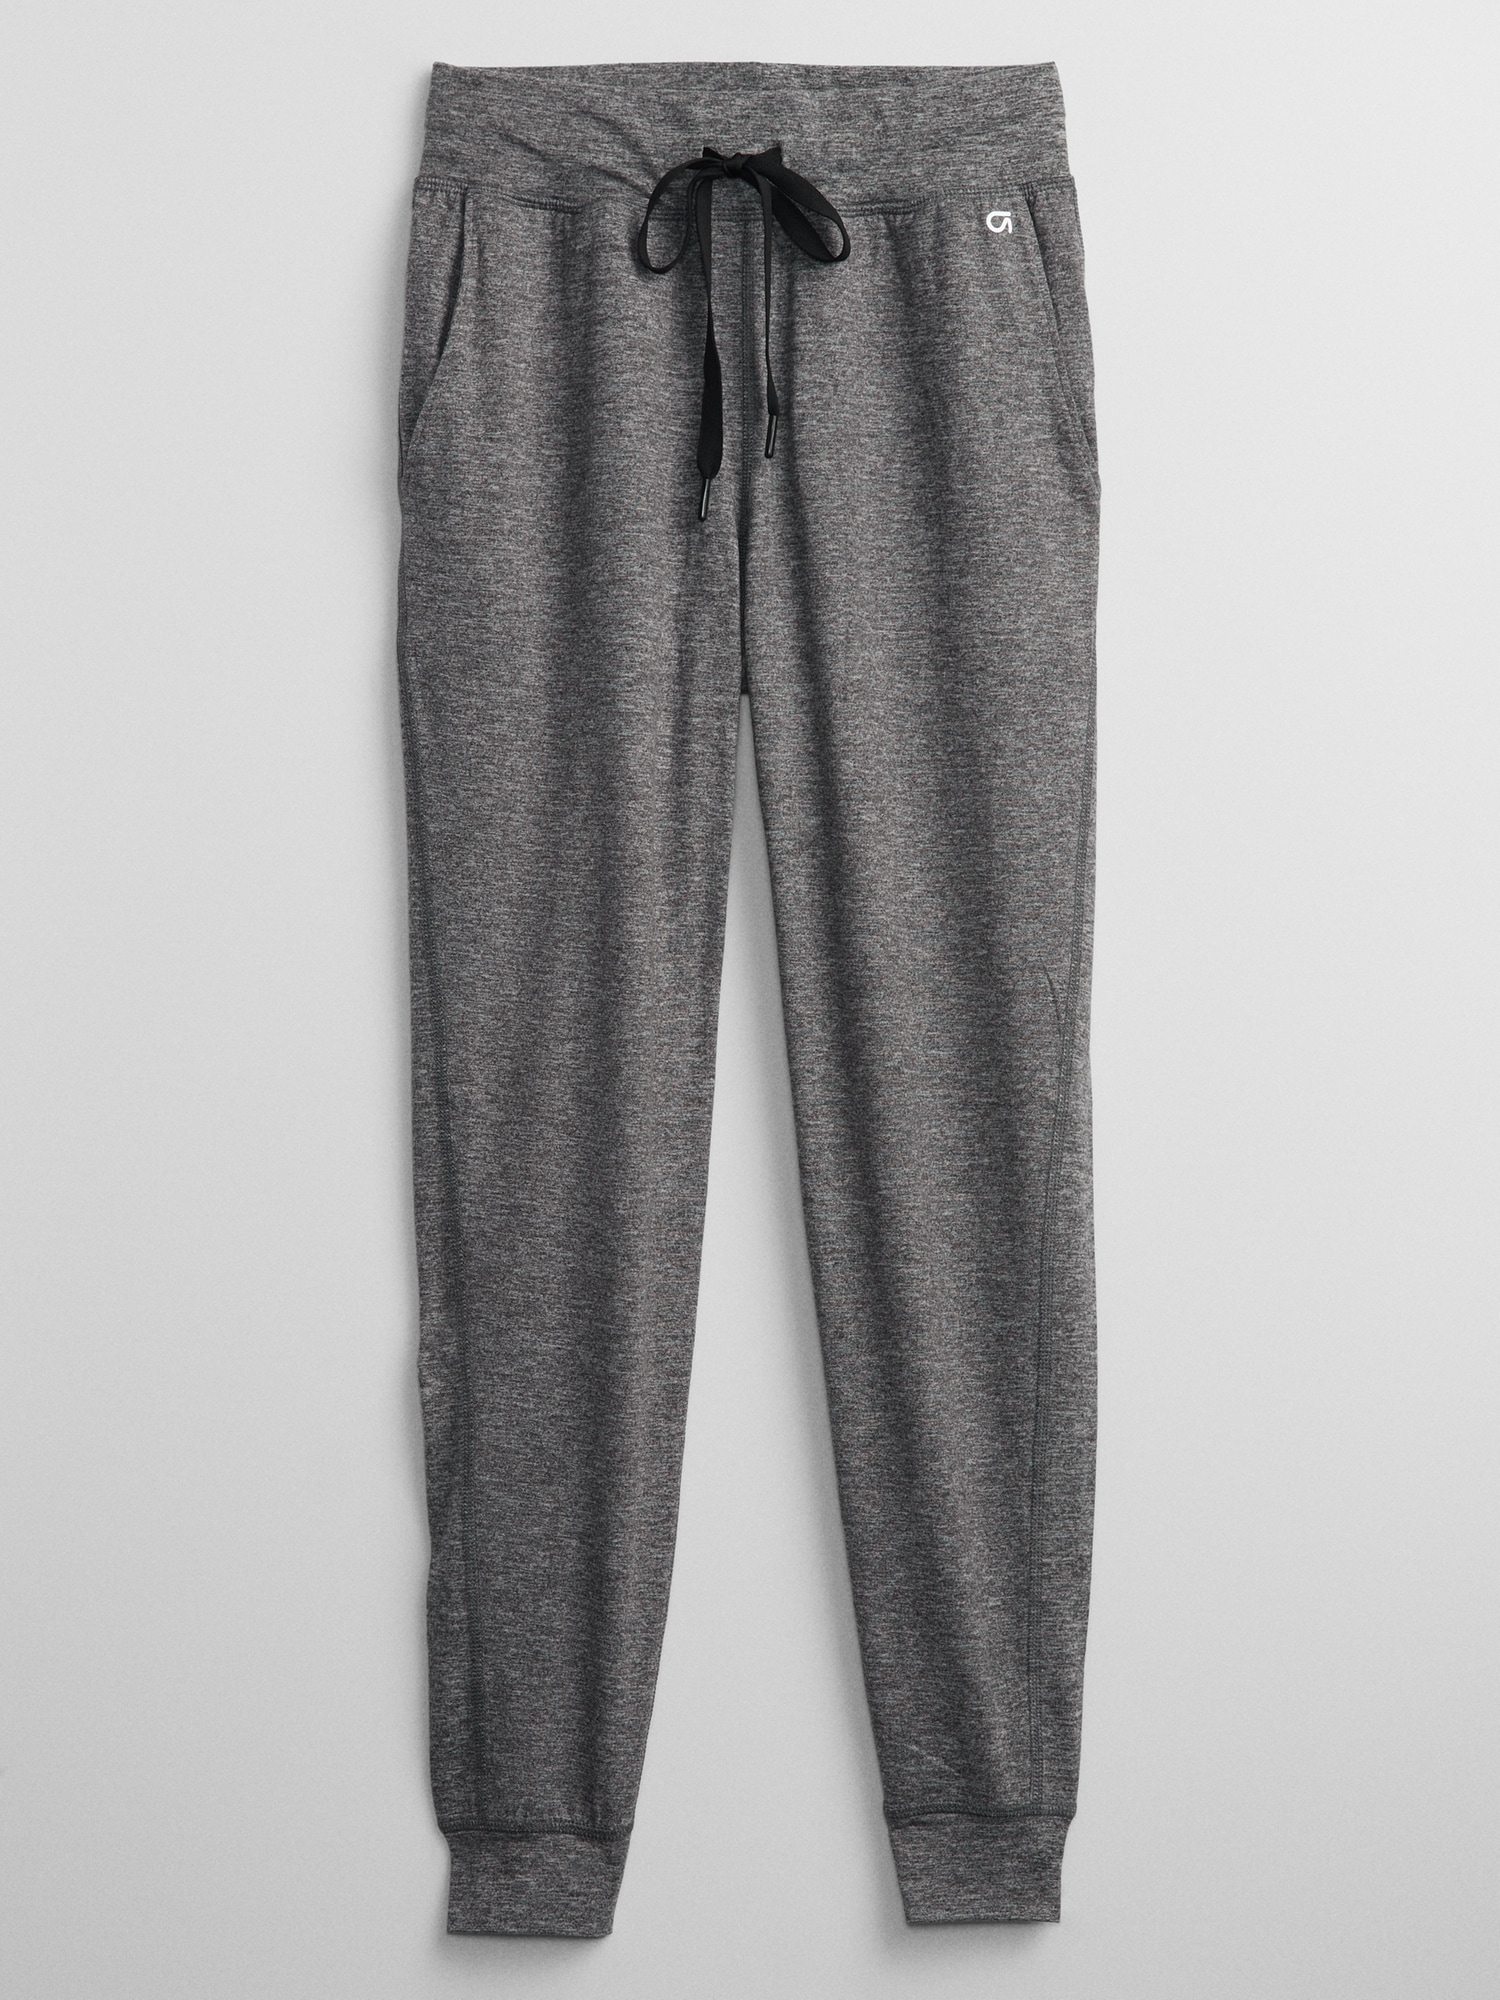 Buy the NWT Womens Gray Elastic Waist Tapered Fit Stretch Jogger